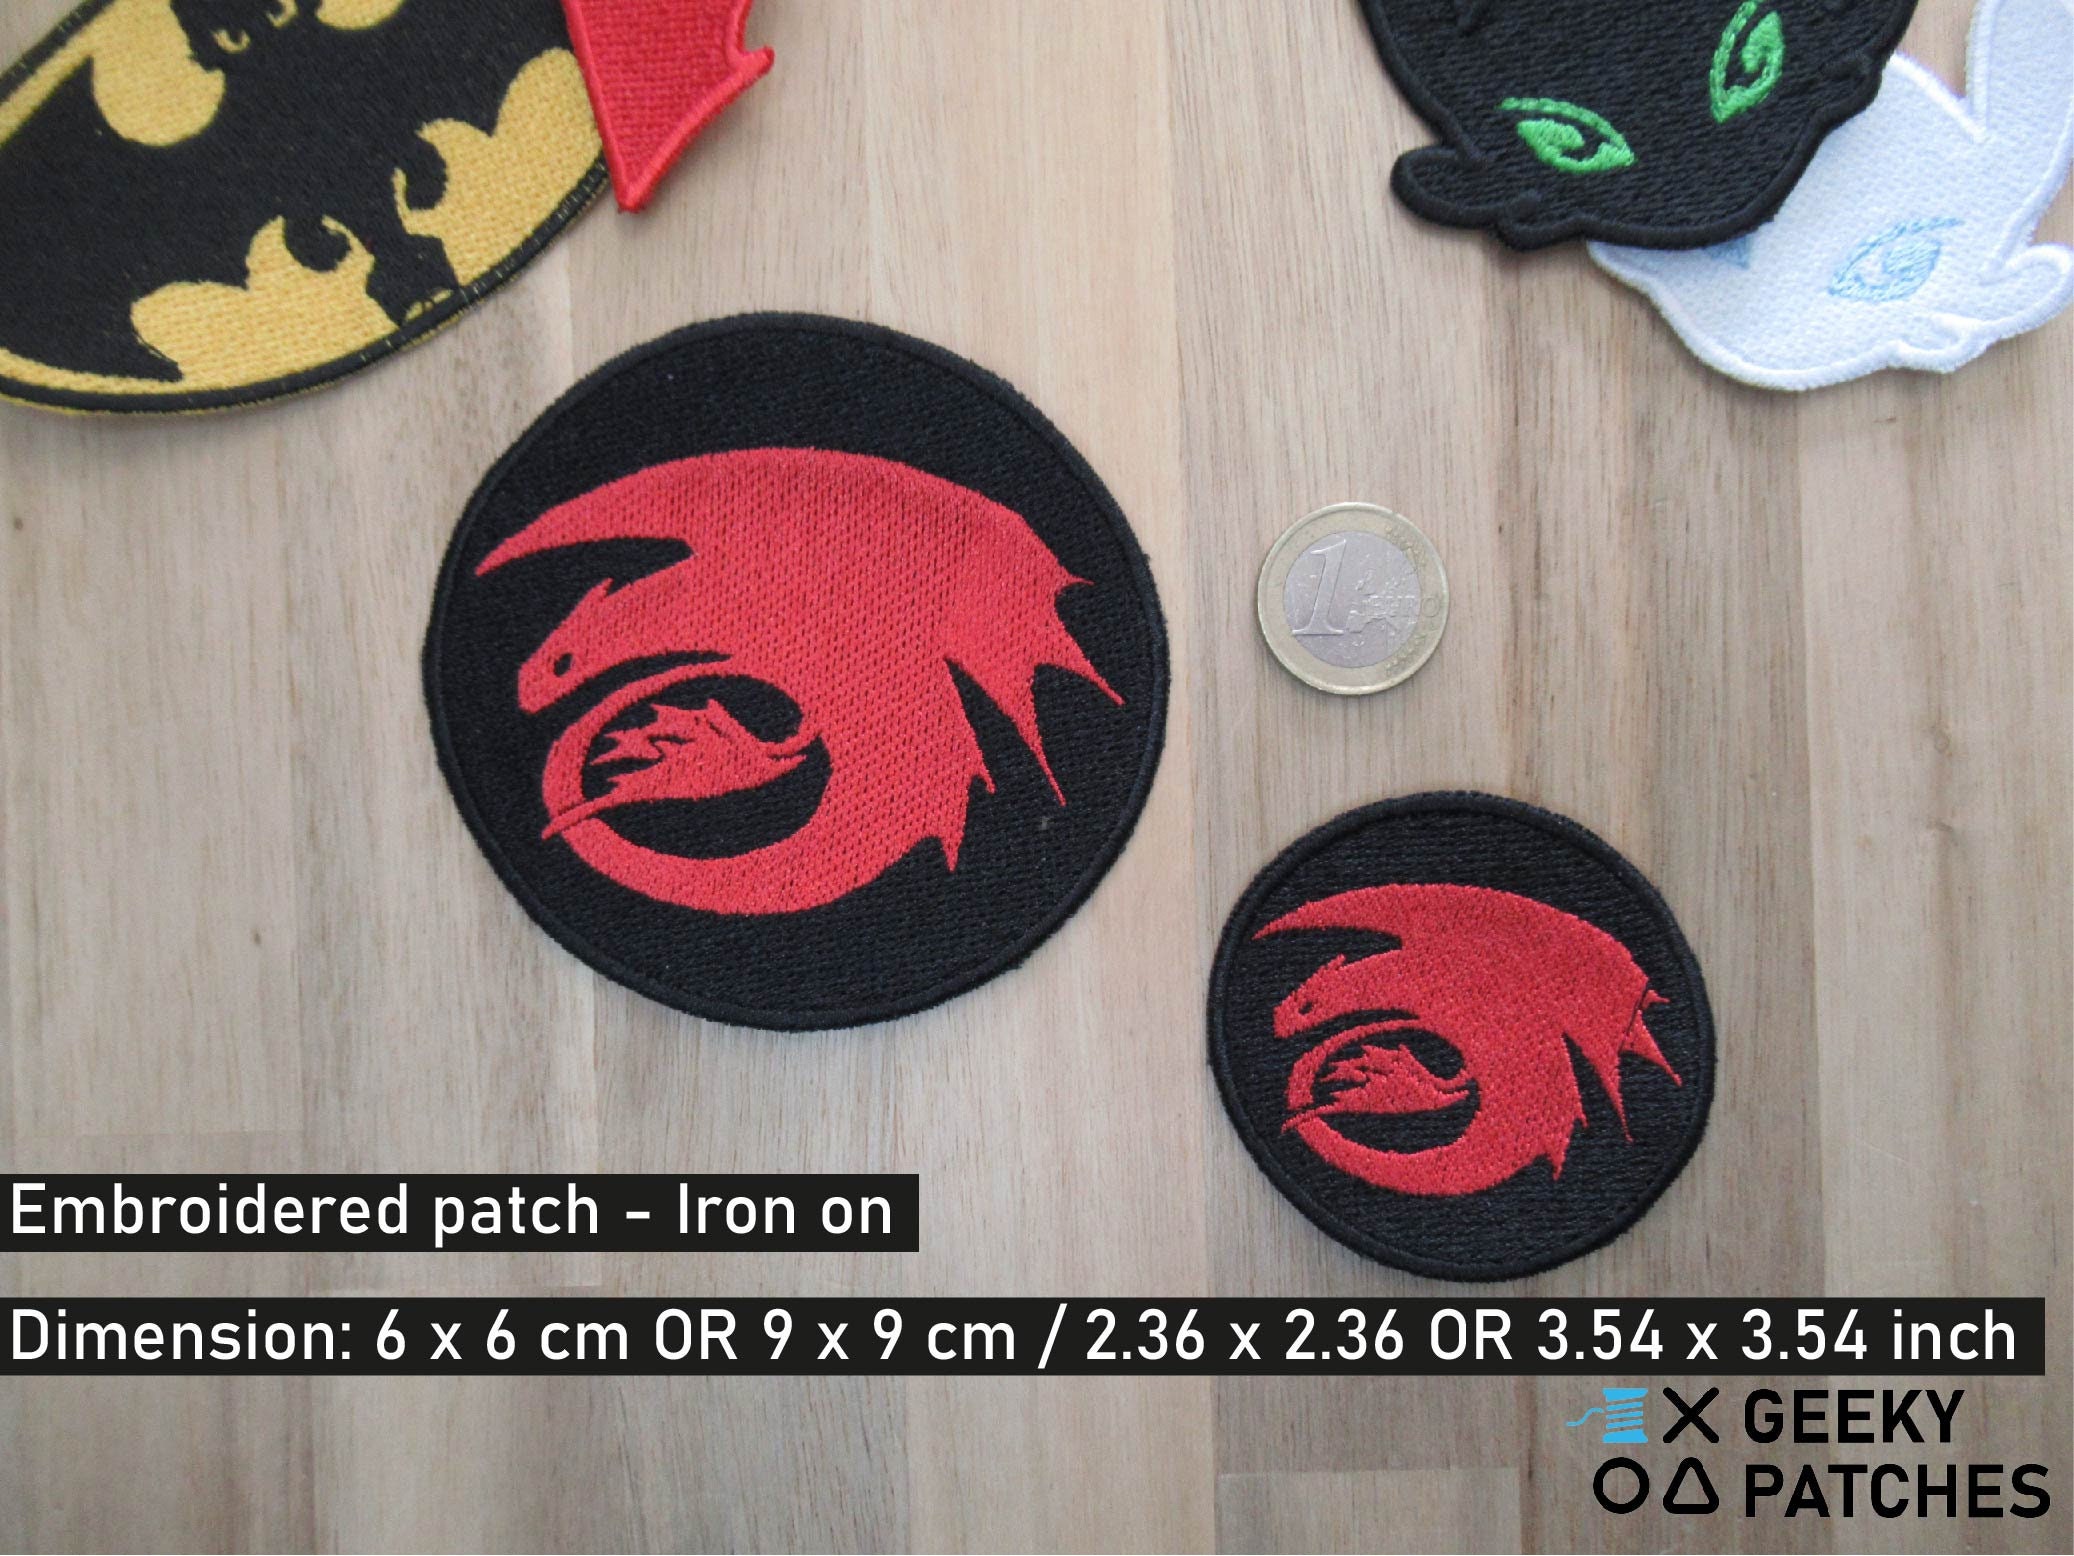 How to Train Your Dragon Patch 